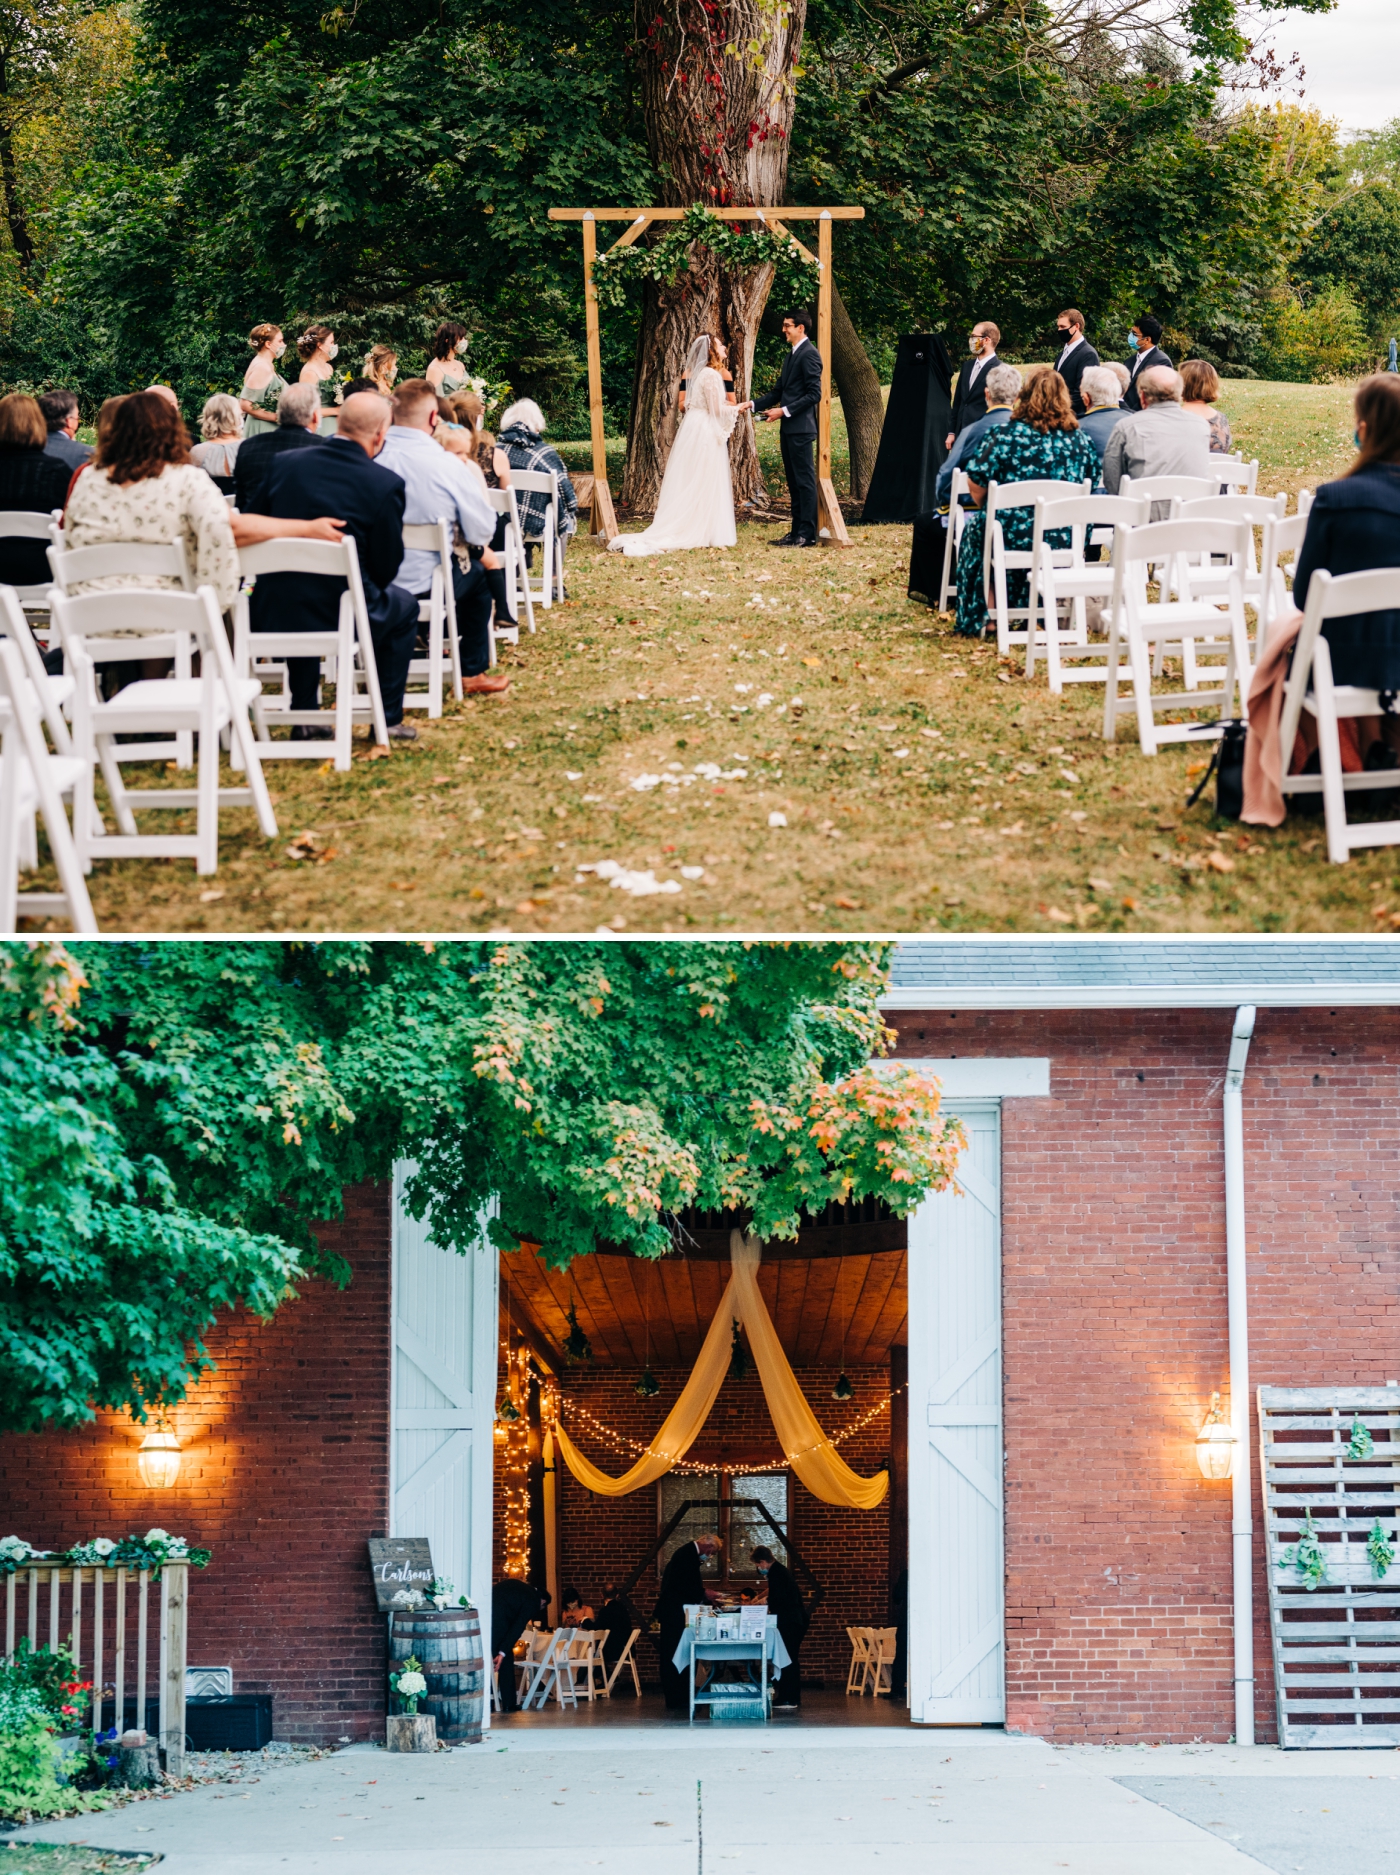 Outdoor wedding ceremony at The Freedom Barn